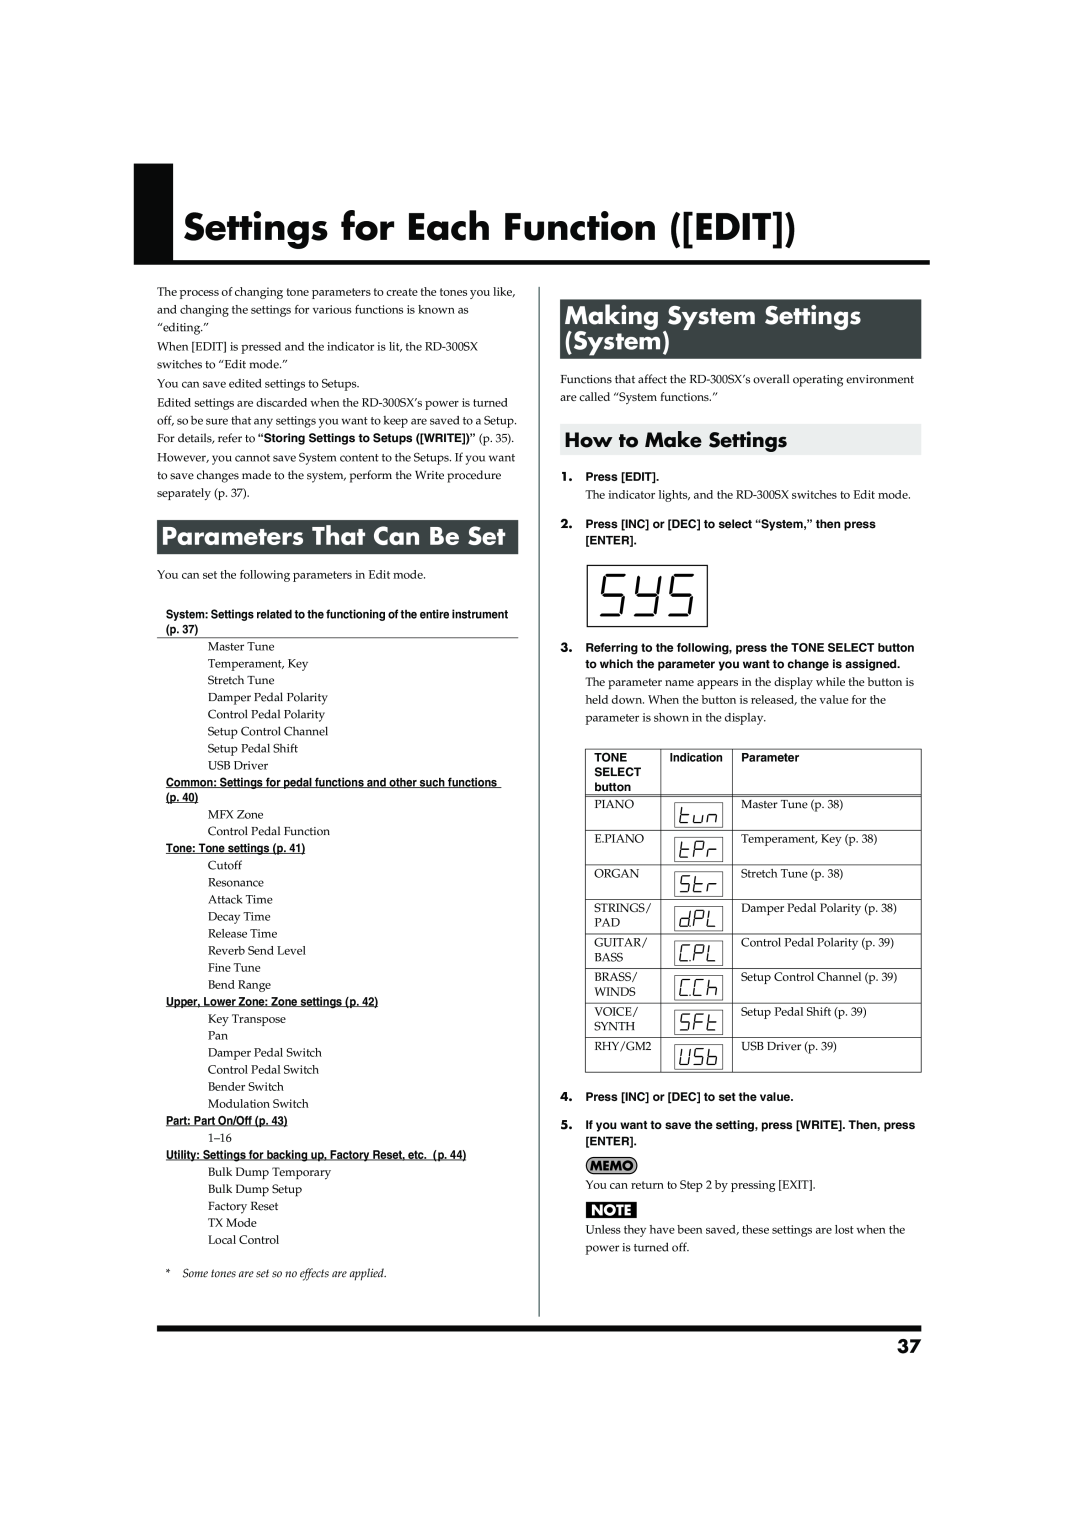 Roland RD-300SX owner manual Settings for Each Function EDIT, Parameters That Can Be Set, Making System Settings System 